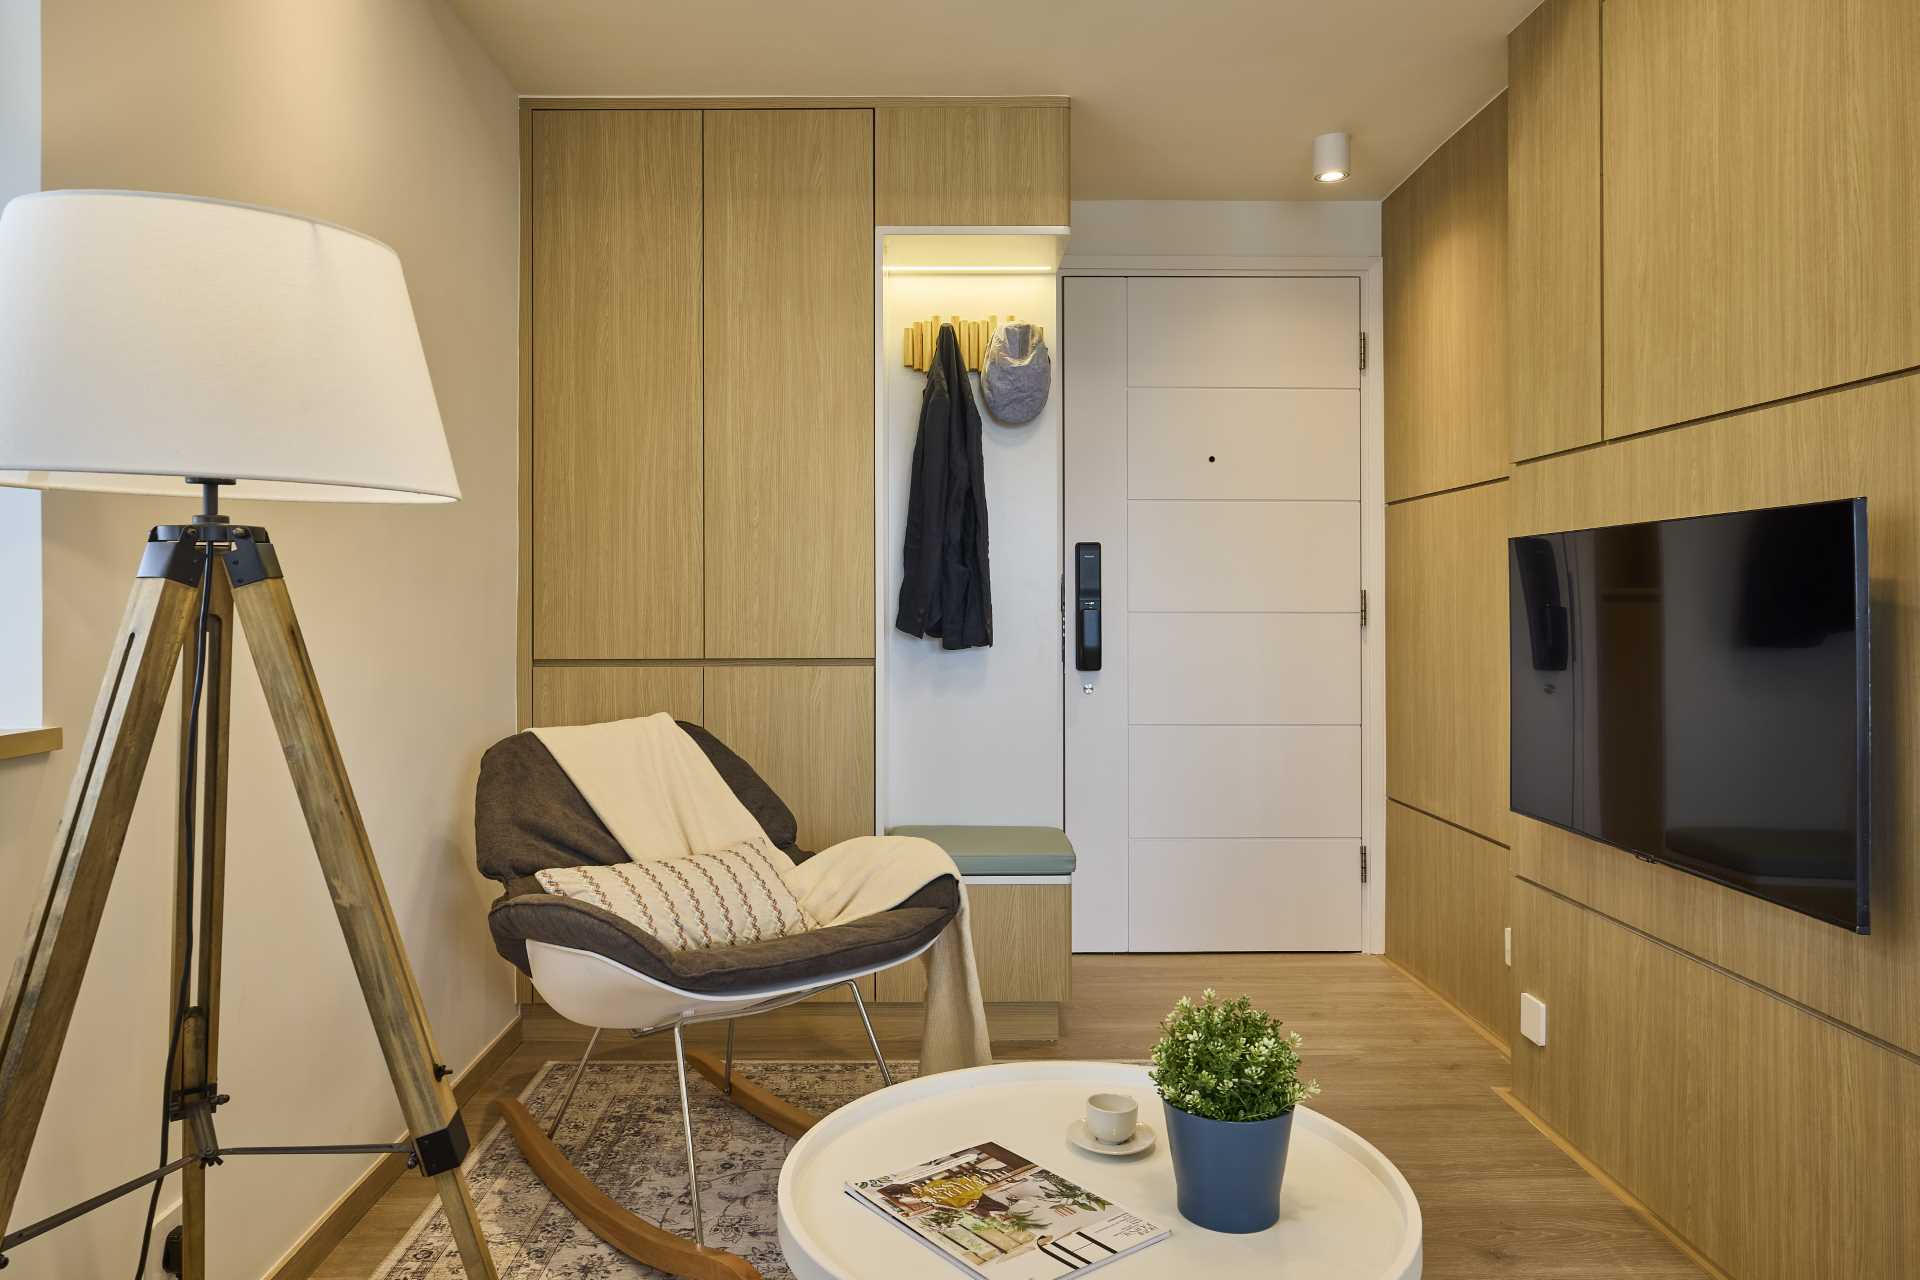 Stepping inside this small apartment, there's an entryway with storage cabinets and a bench with coat hooks above.